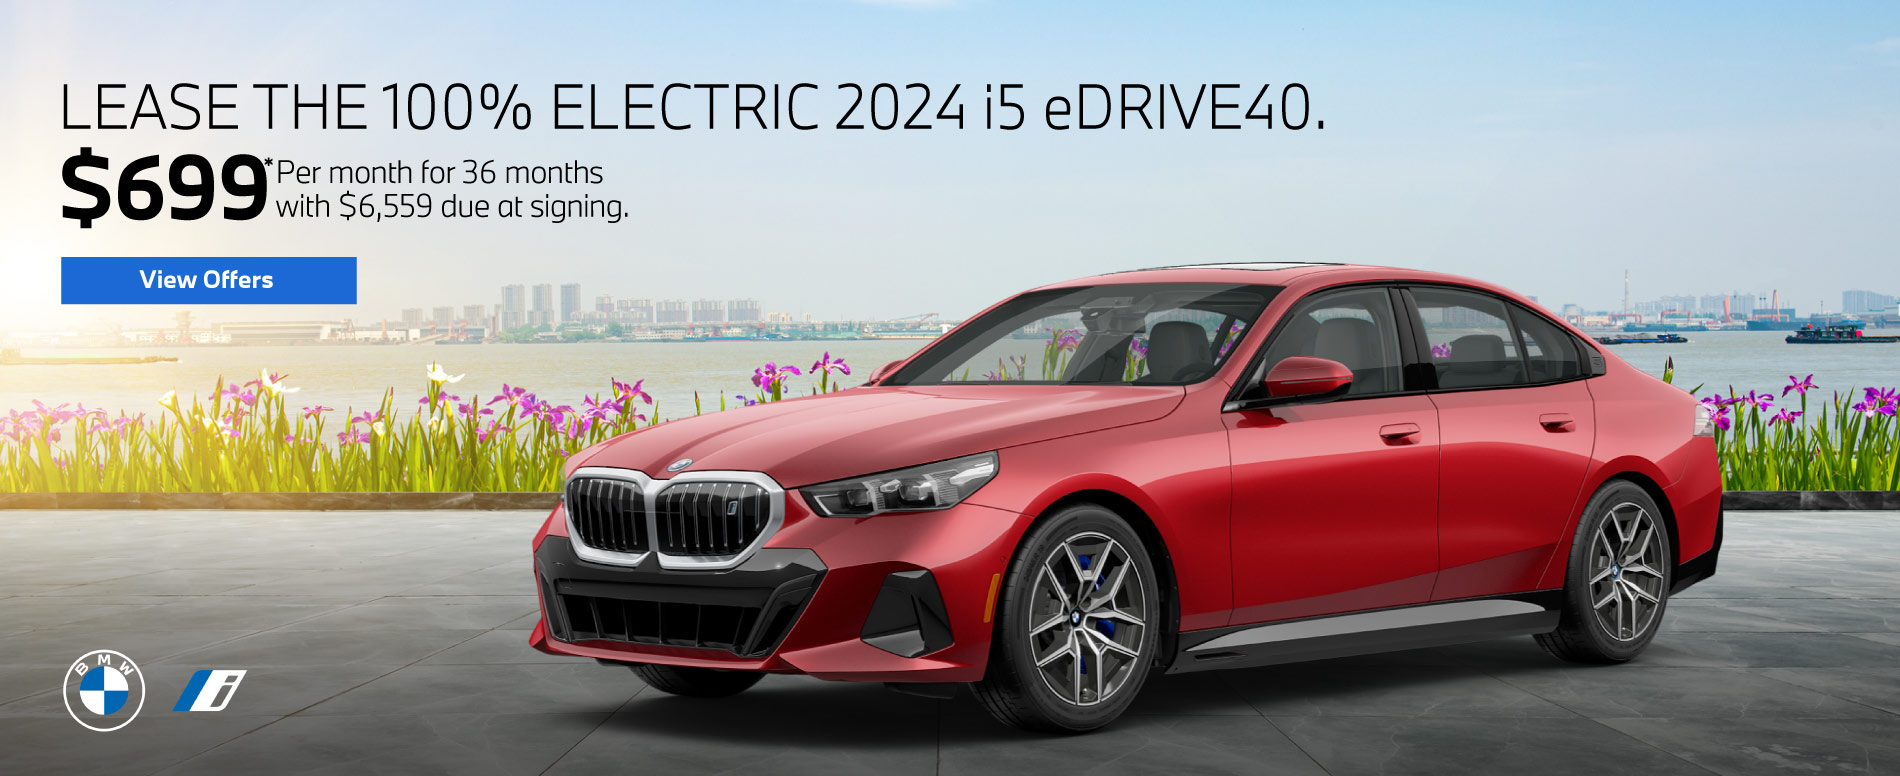 Lease the 2024 i5 eDrive40 - $719 per month* - View Offers